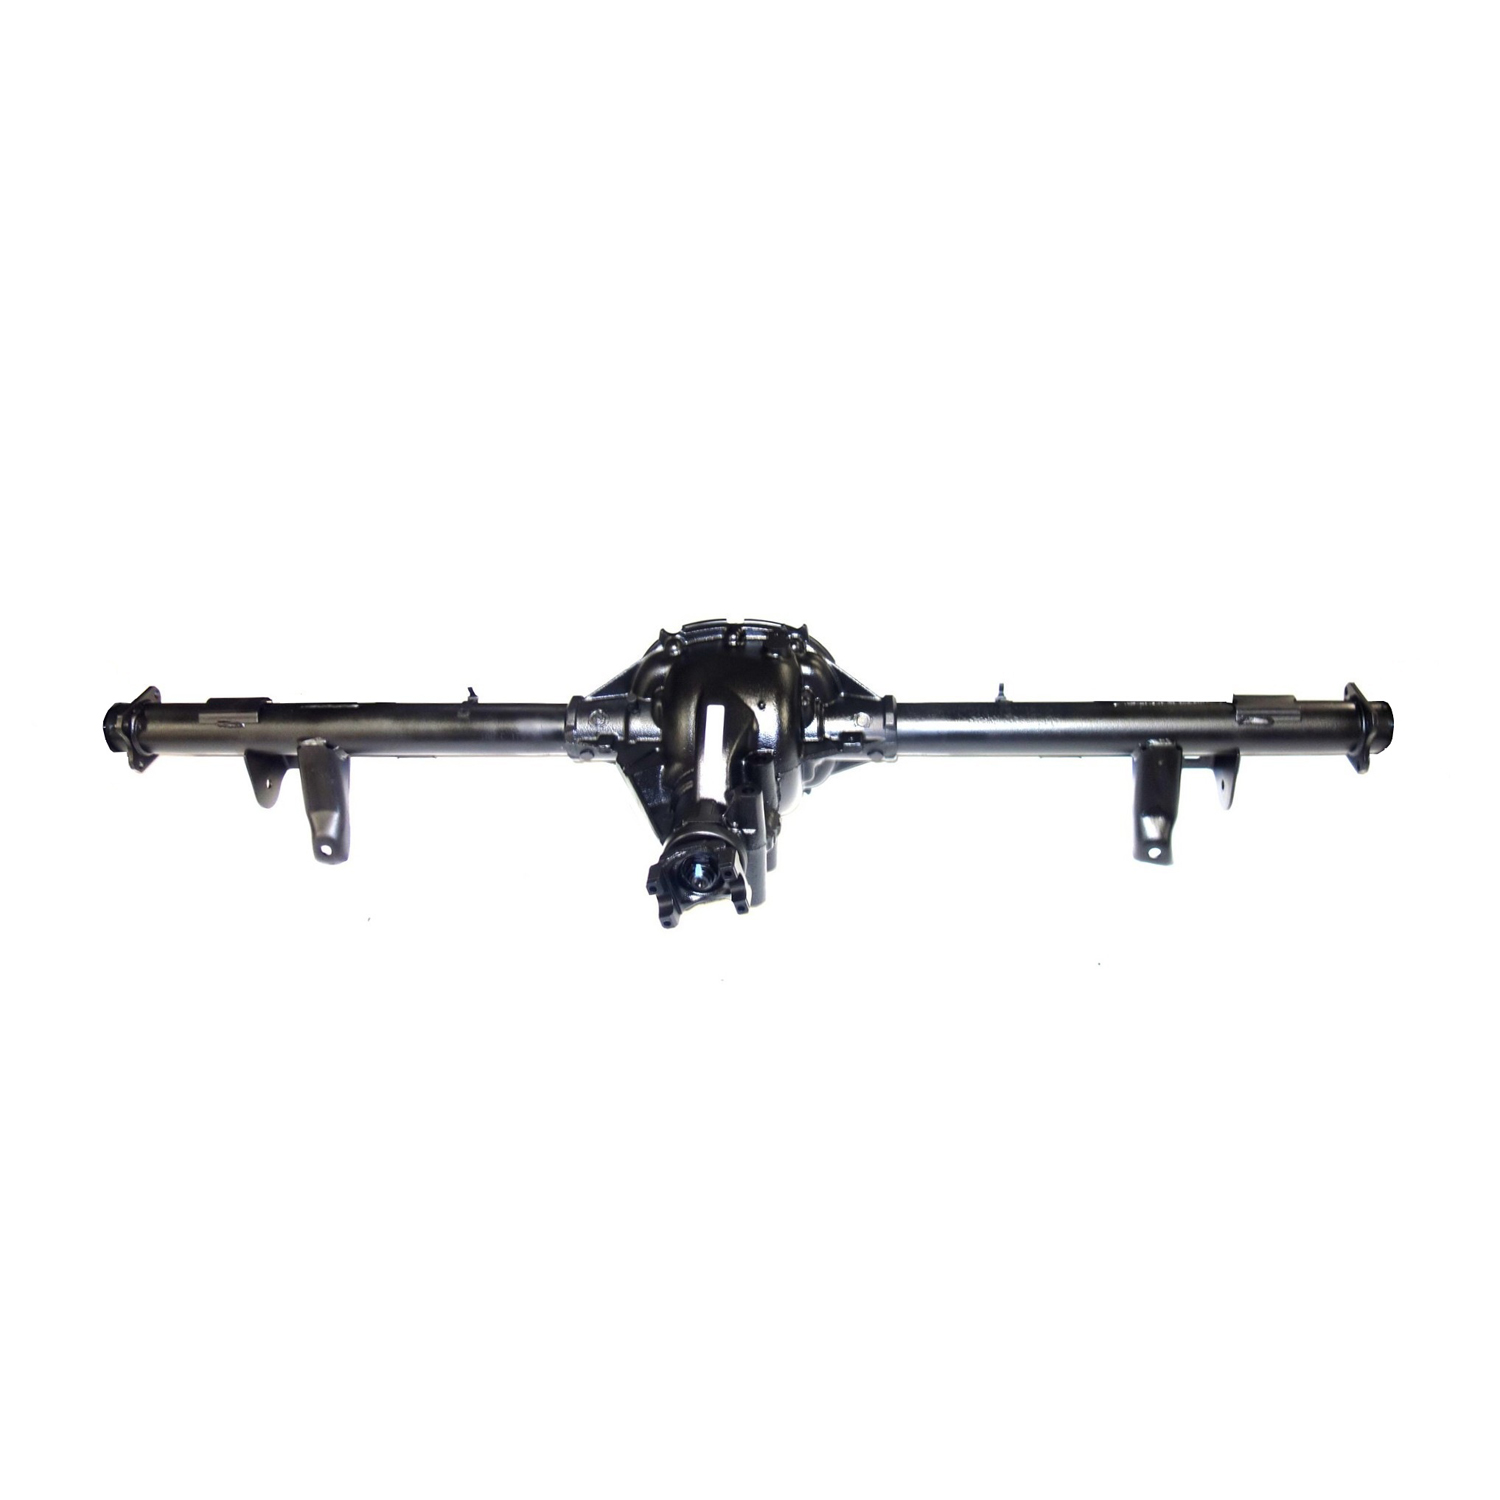 Remanufactured Axle Assy for GM 7.5" 95-97 S10 Blazer & S15 Jimmy, 3.42 , 2wd Posi LSD